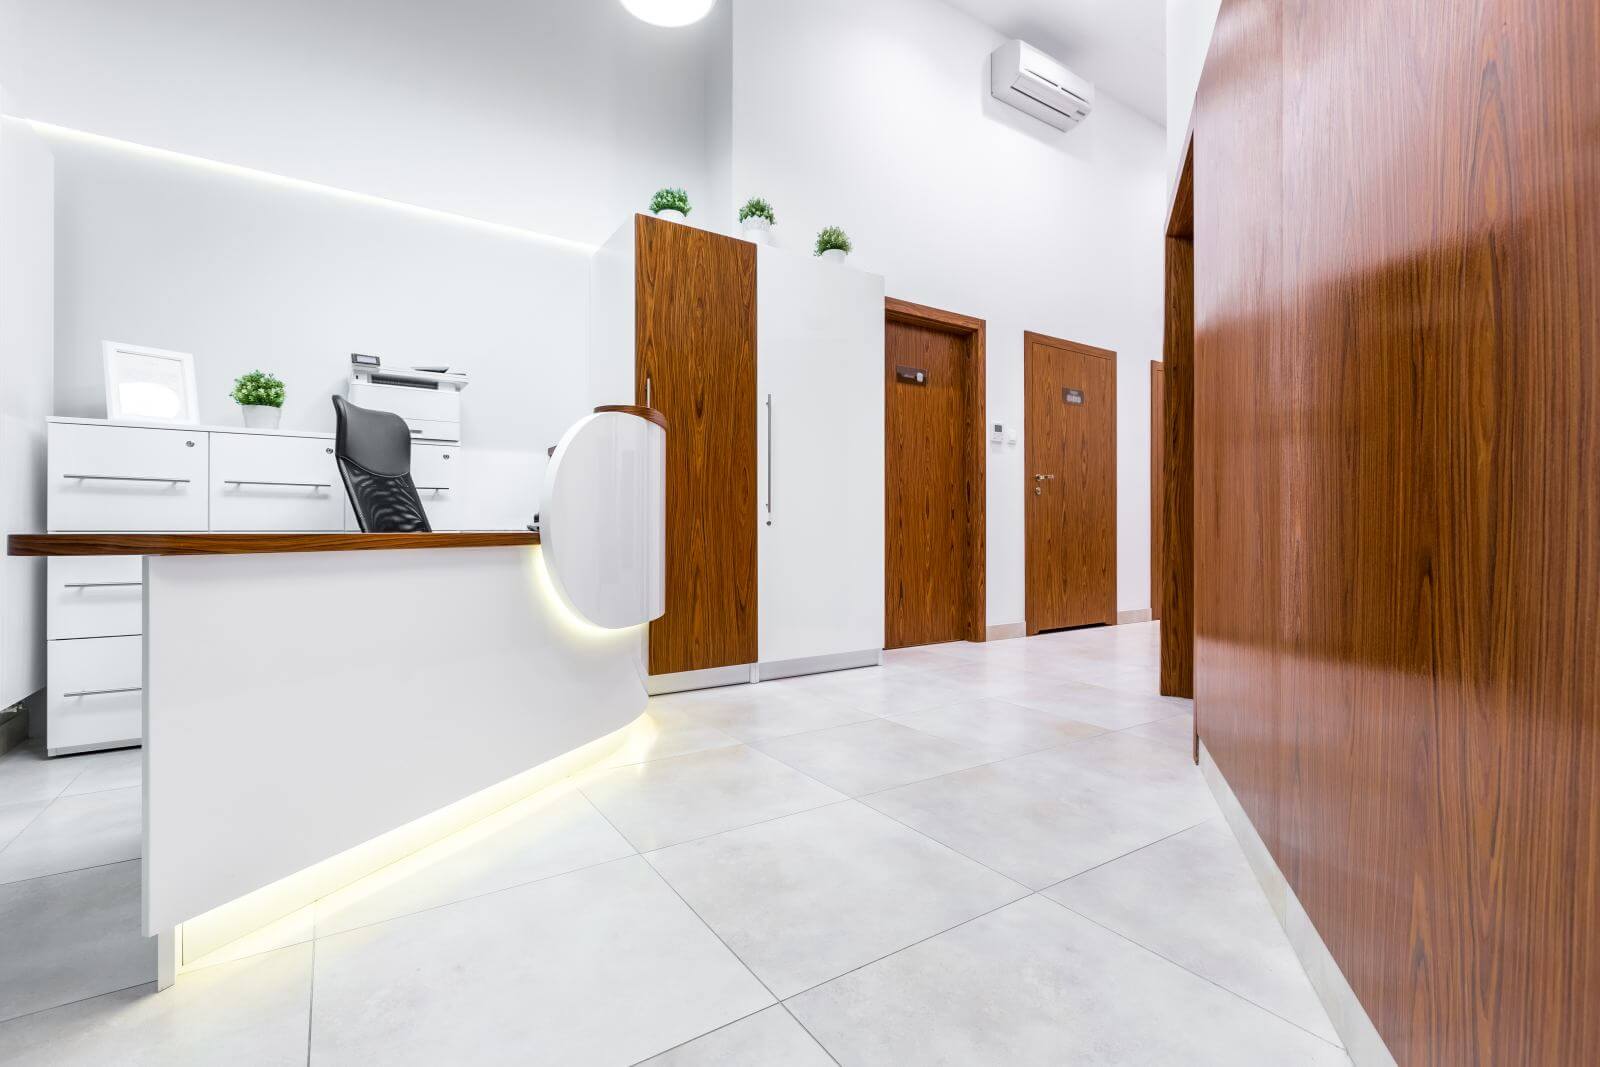 Reception of modern, private clinic with white flooring, wooden doors and desk